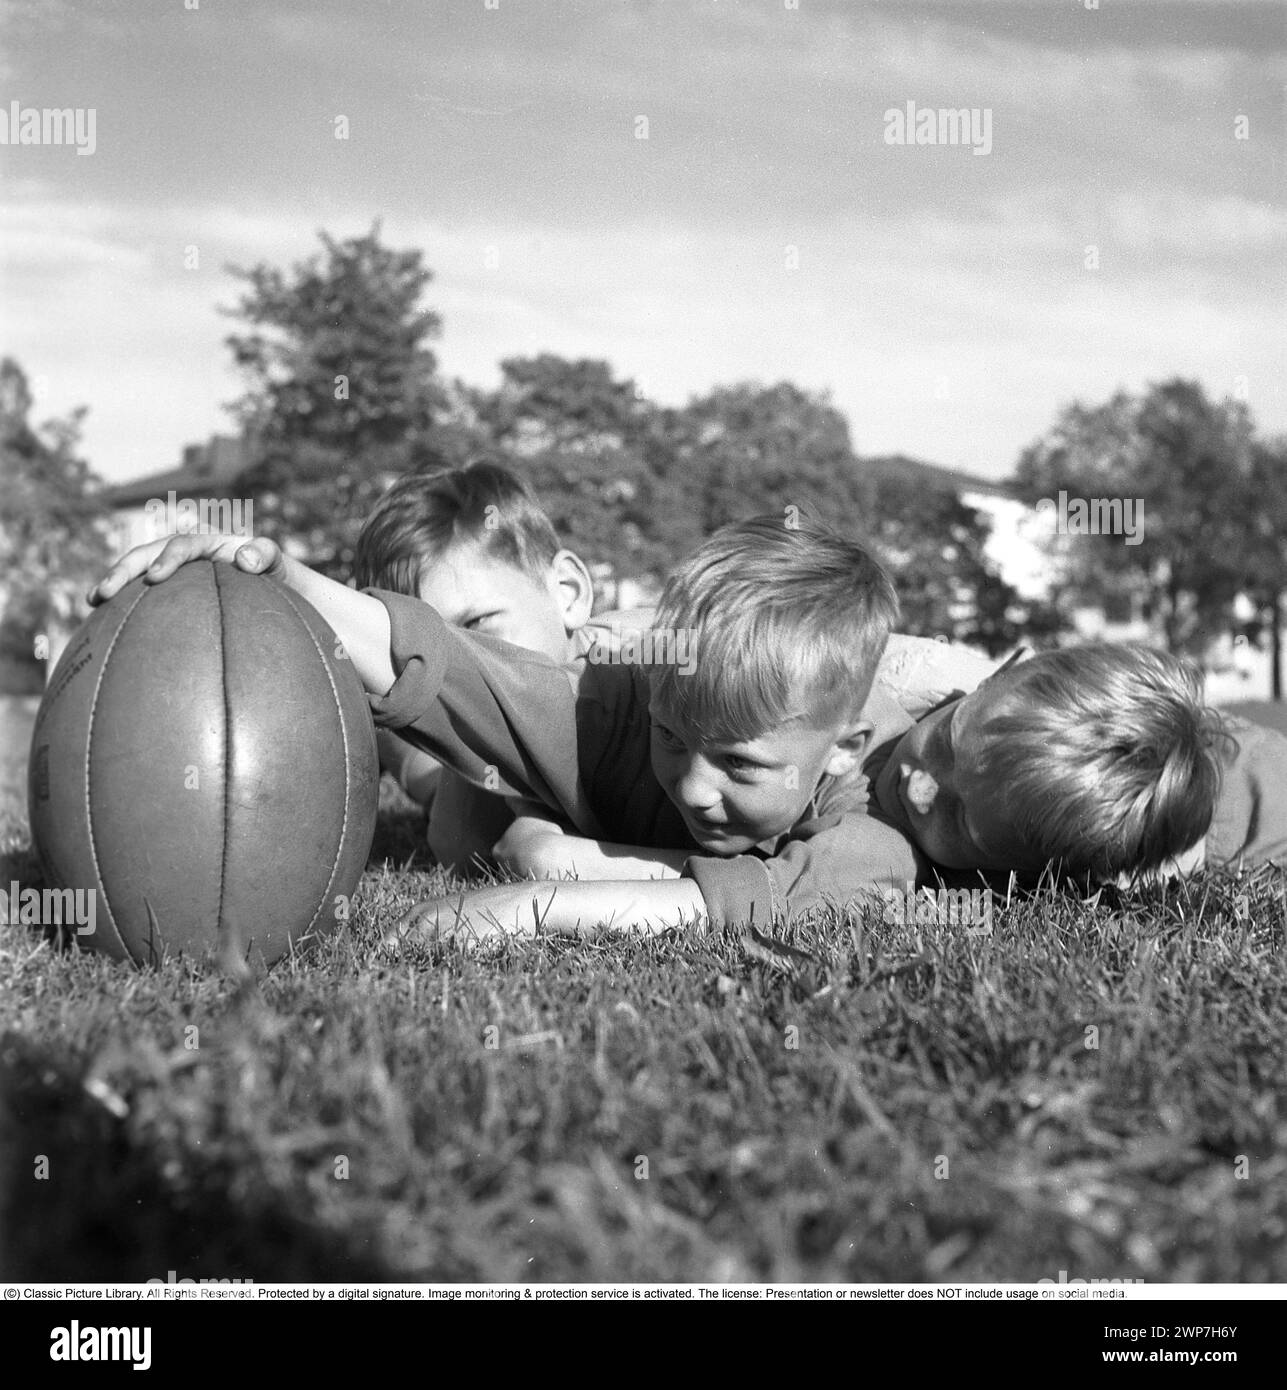 Rugby 1940. Three young rugby players lying in the grass on the rugby field, one holding the rugby ball. The rugby ball has an oval shape, four panels and a weight of about 400 grams. 1942. Kristoffersson ref A56-5 Stock Photo